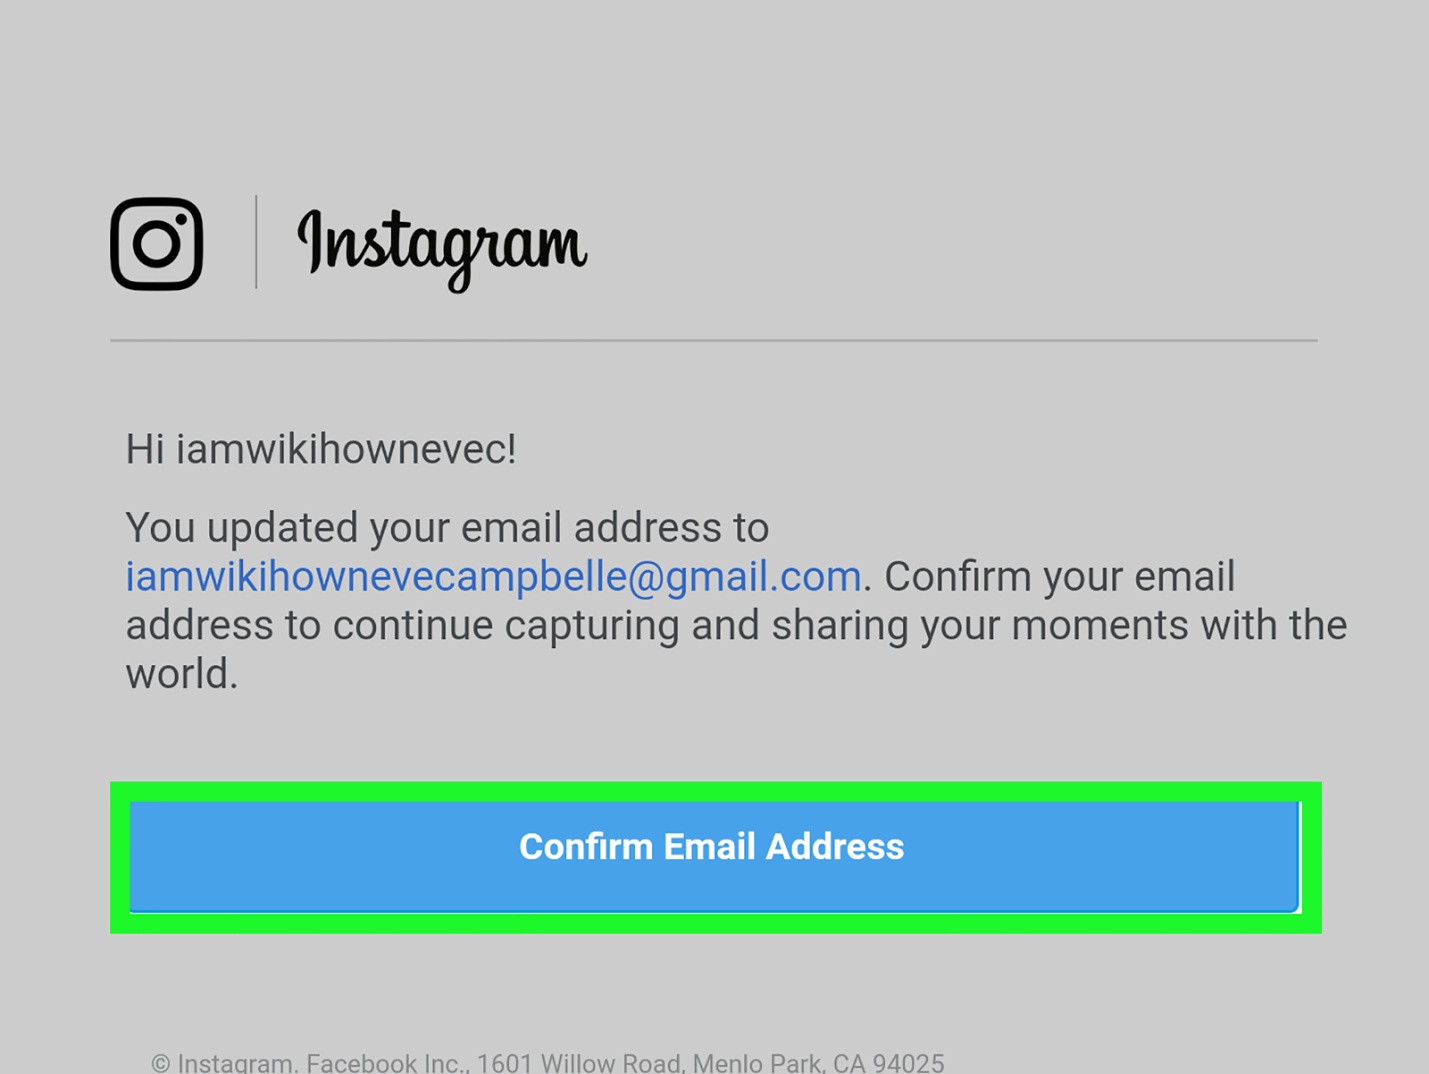 How to change Intsgram E-Mail